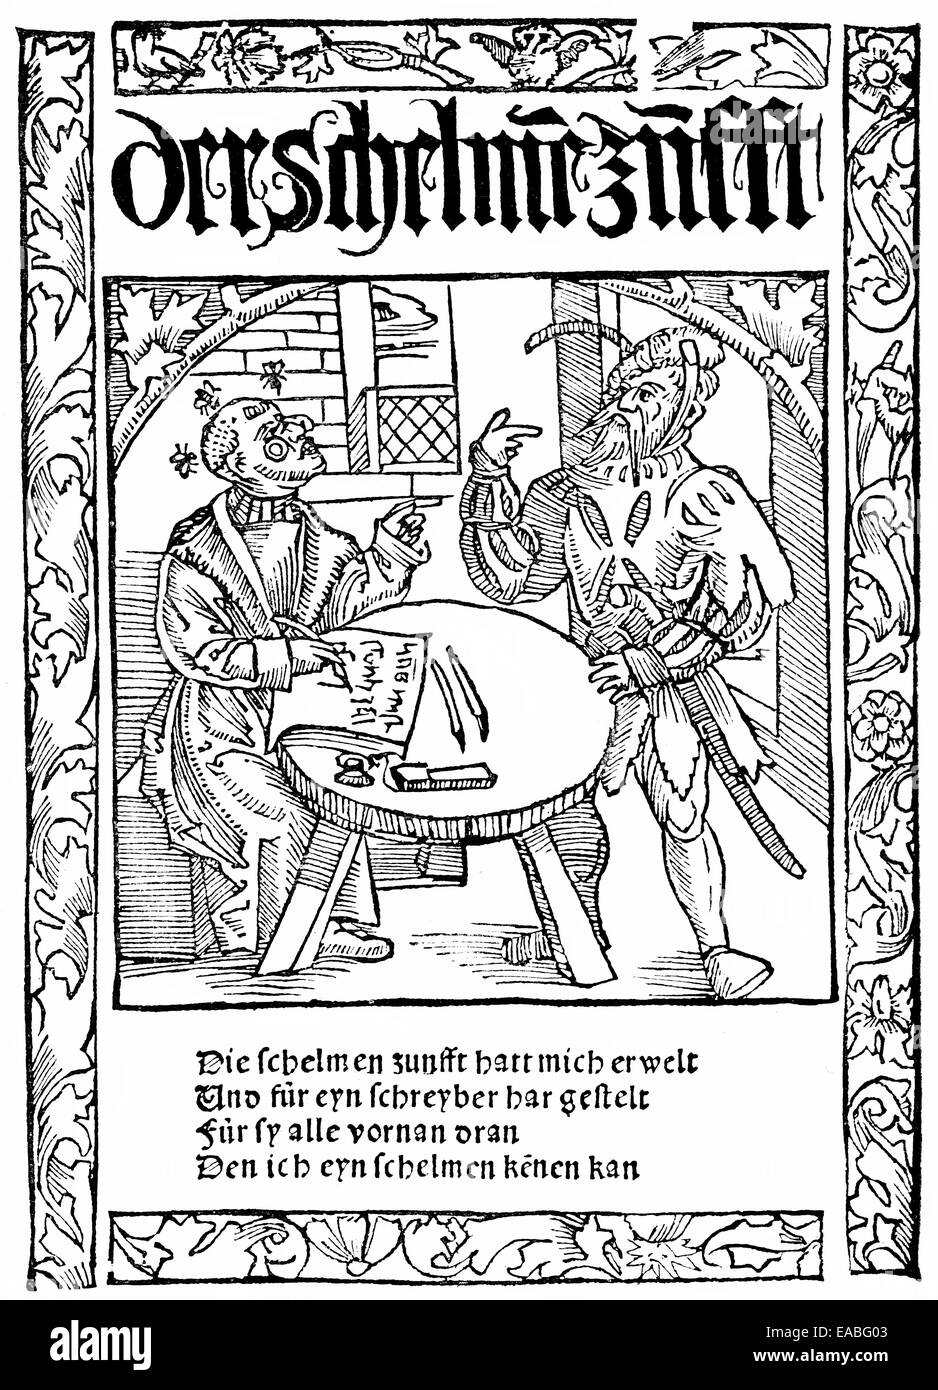 front page, 'rogue's guild', historic print, woodcut from 1512, Thomas Murner, 1475-1537, poet and satirist, humanist and contro Stock Photo